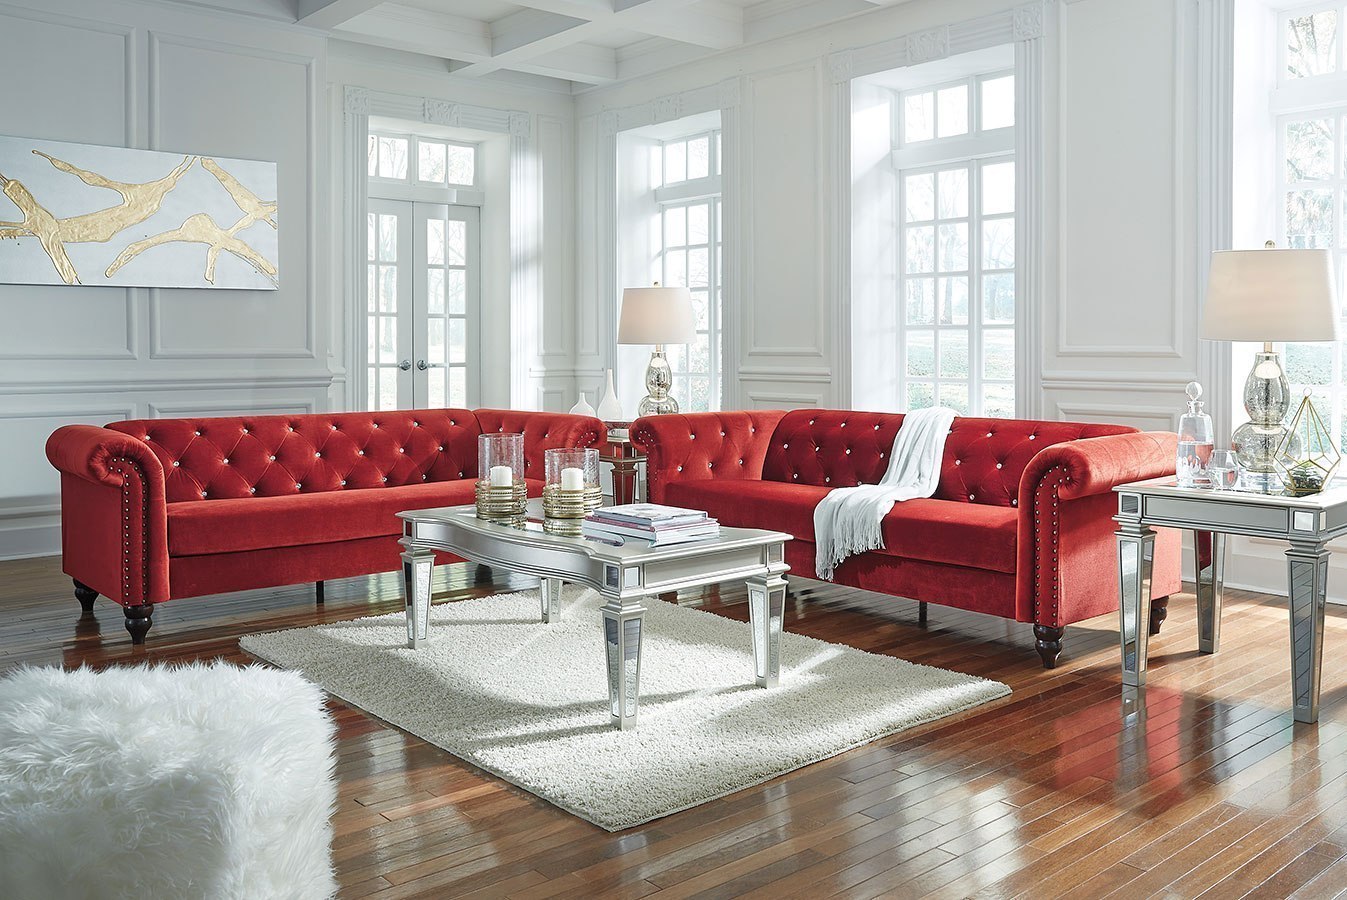 Malchin Red Living Room Set By Signature Design By Ashley FurniturePick